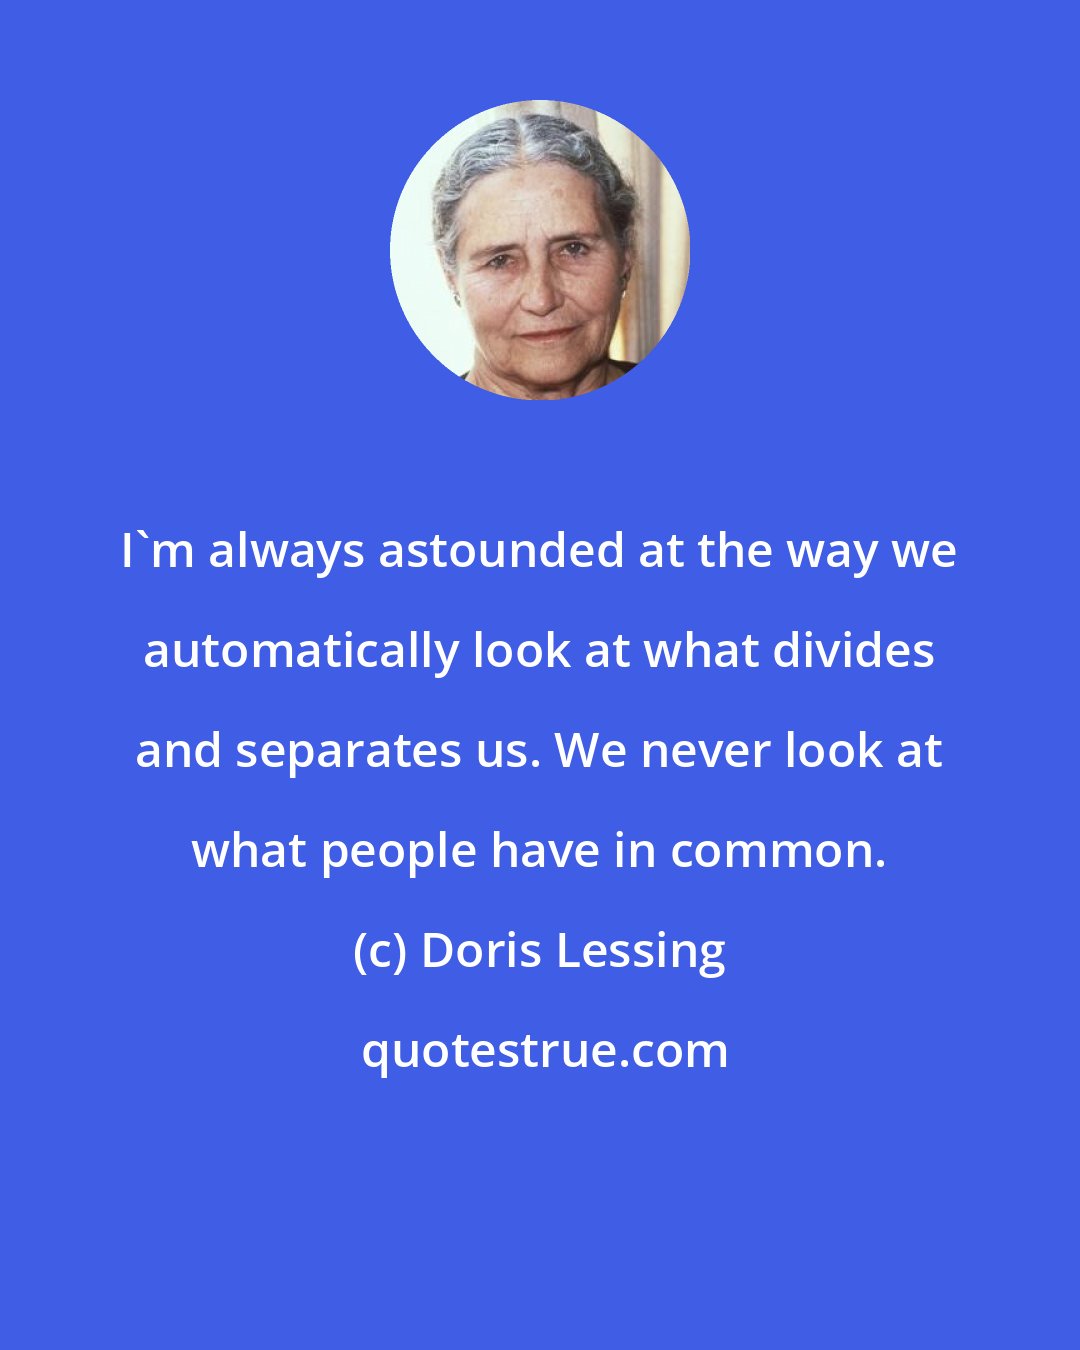 Doris Lessing: I'm always astounded at the way we automatically look at what divides and separates us. We never look at what people have in common.